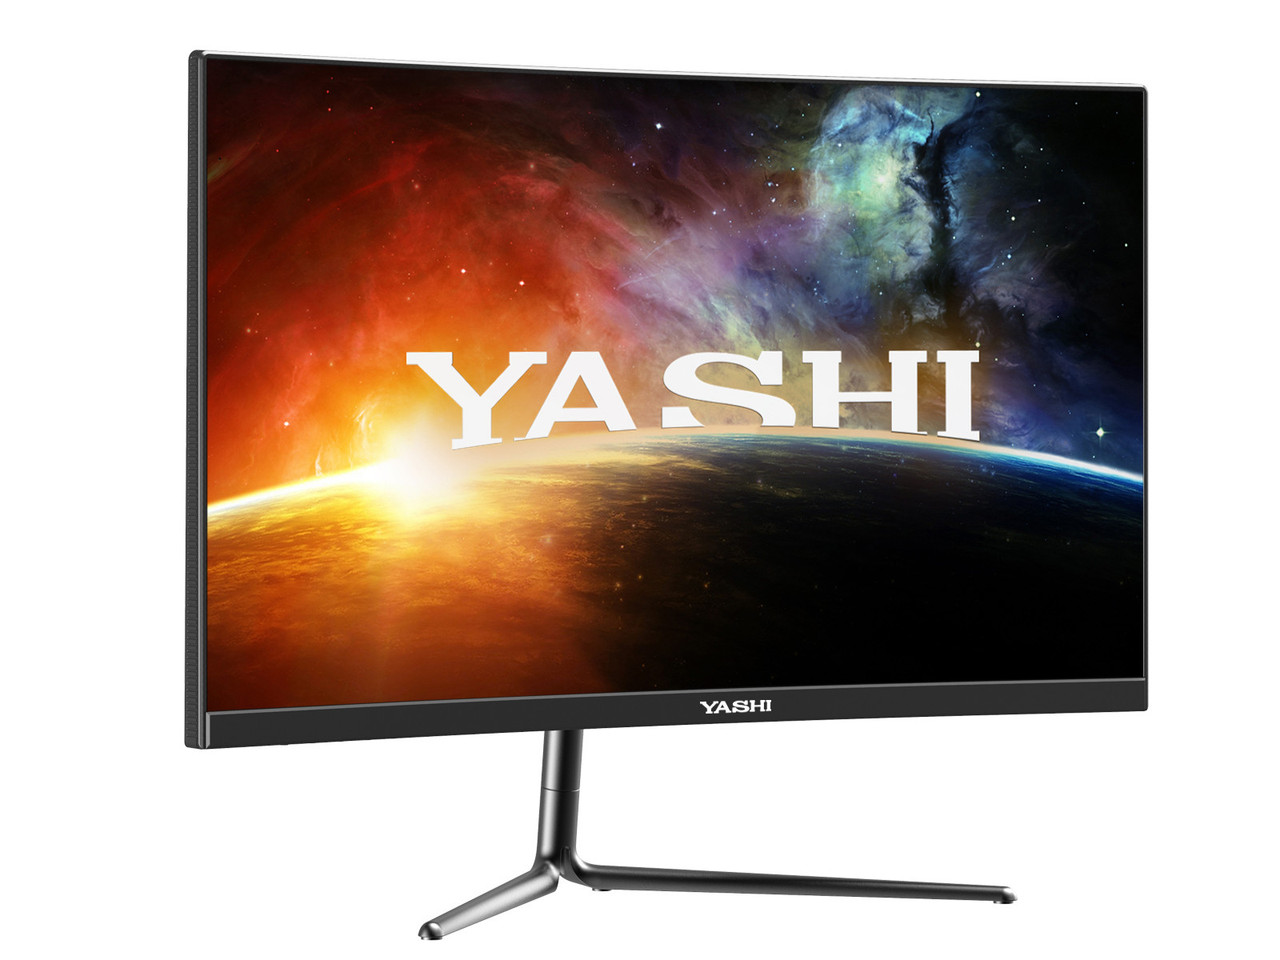 Yashi Pioneer Gaming Monitor Series 240Hz 27" Curved FHD 0.5ms response time 3xHDMI 2xDP Speakers YZ2740